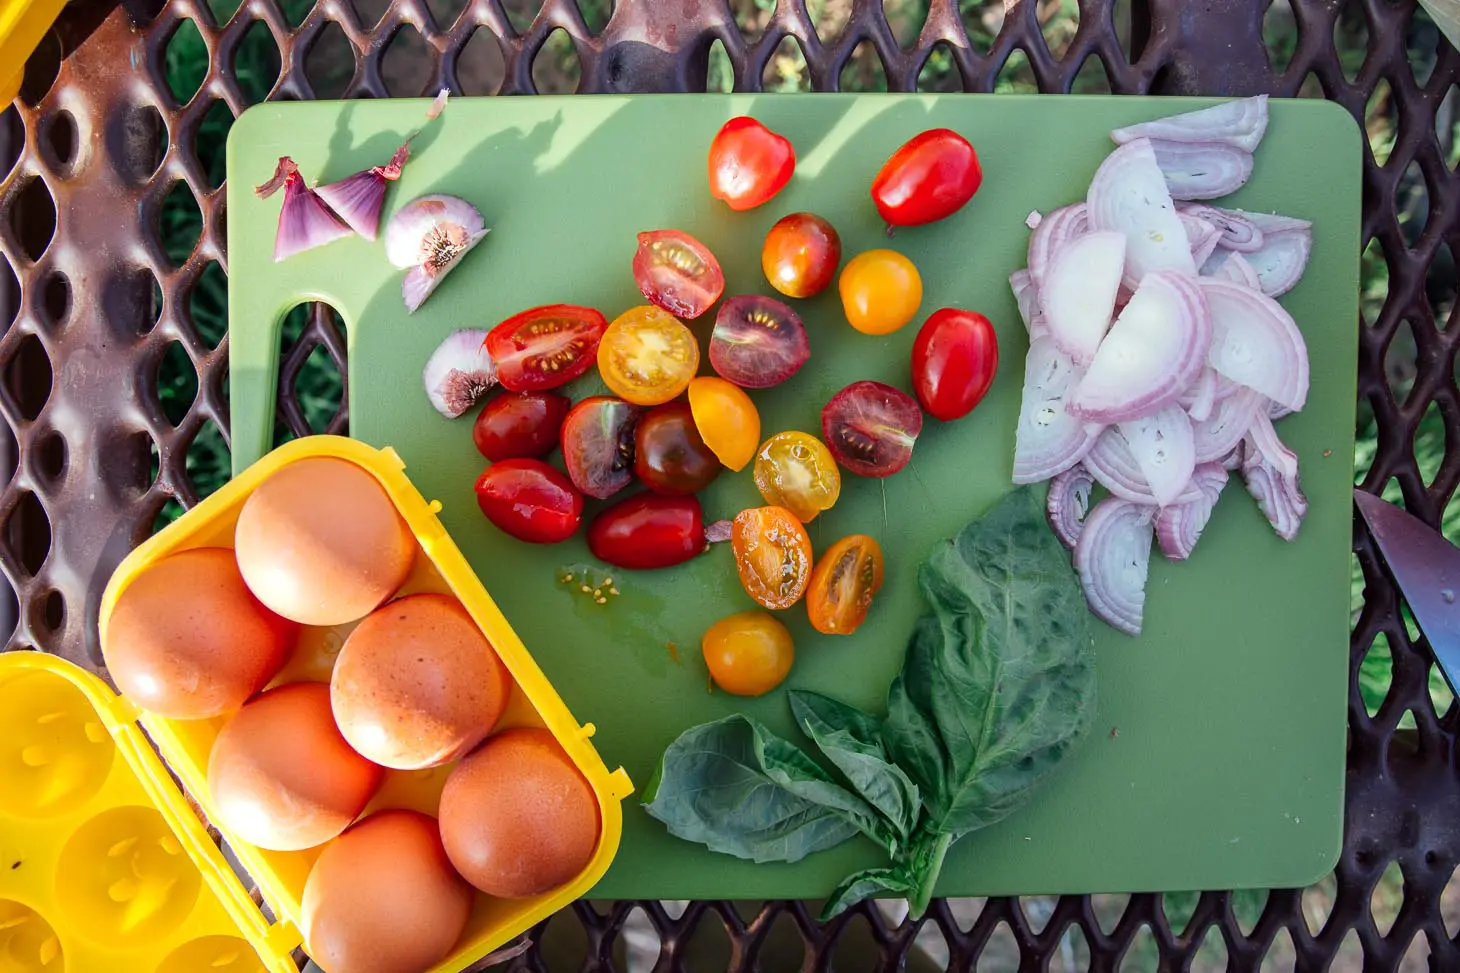 Ingredients for frittata: eggs, tomatoes, shallots, garlic, basil laid out on a cutting board.